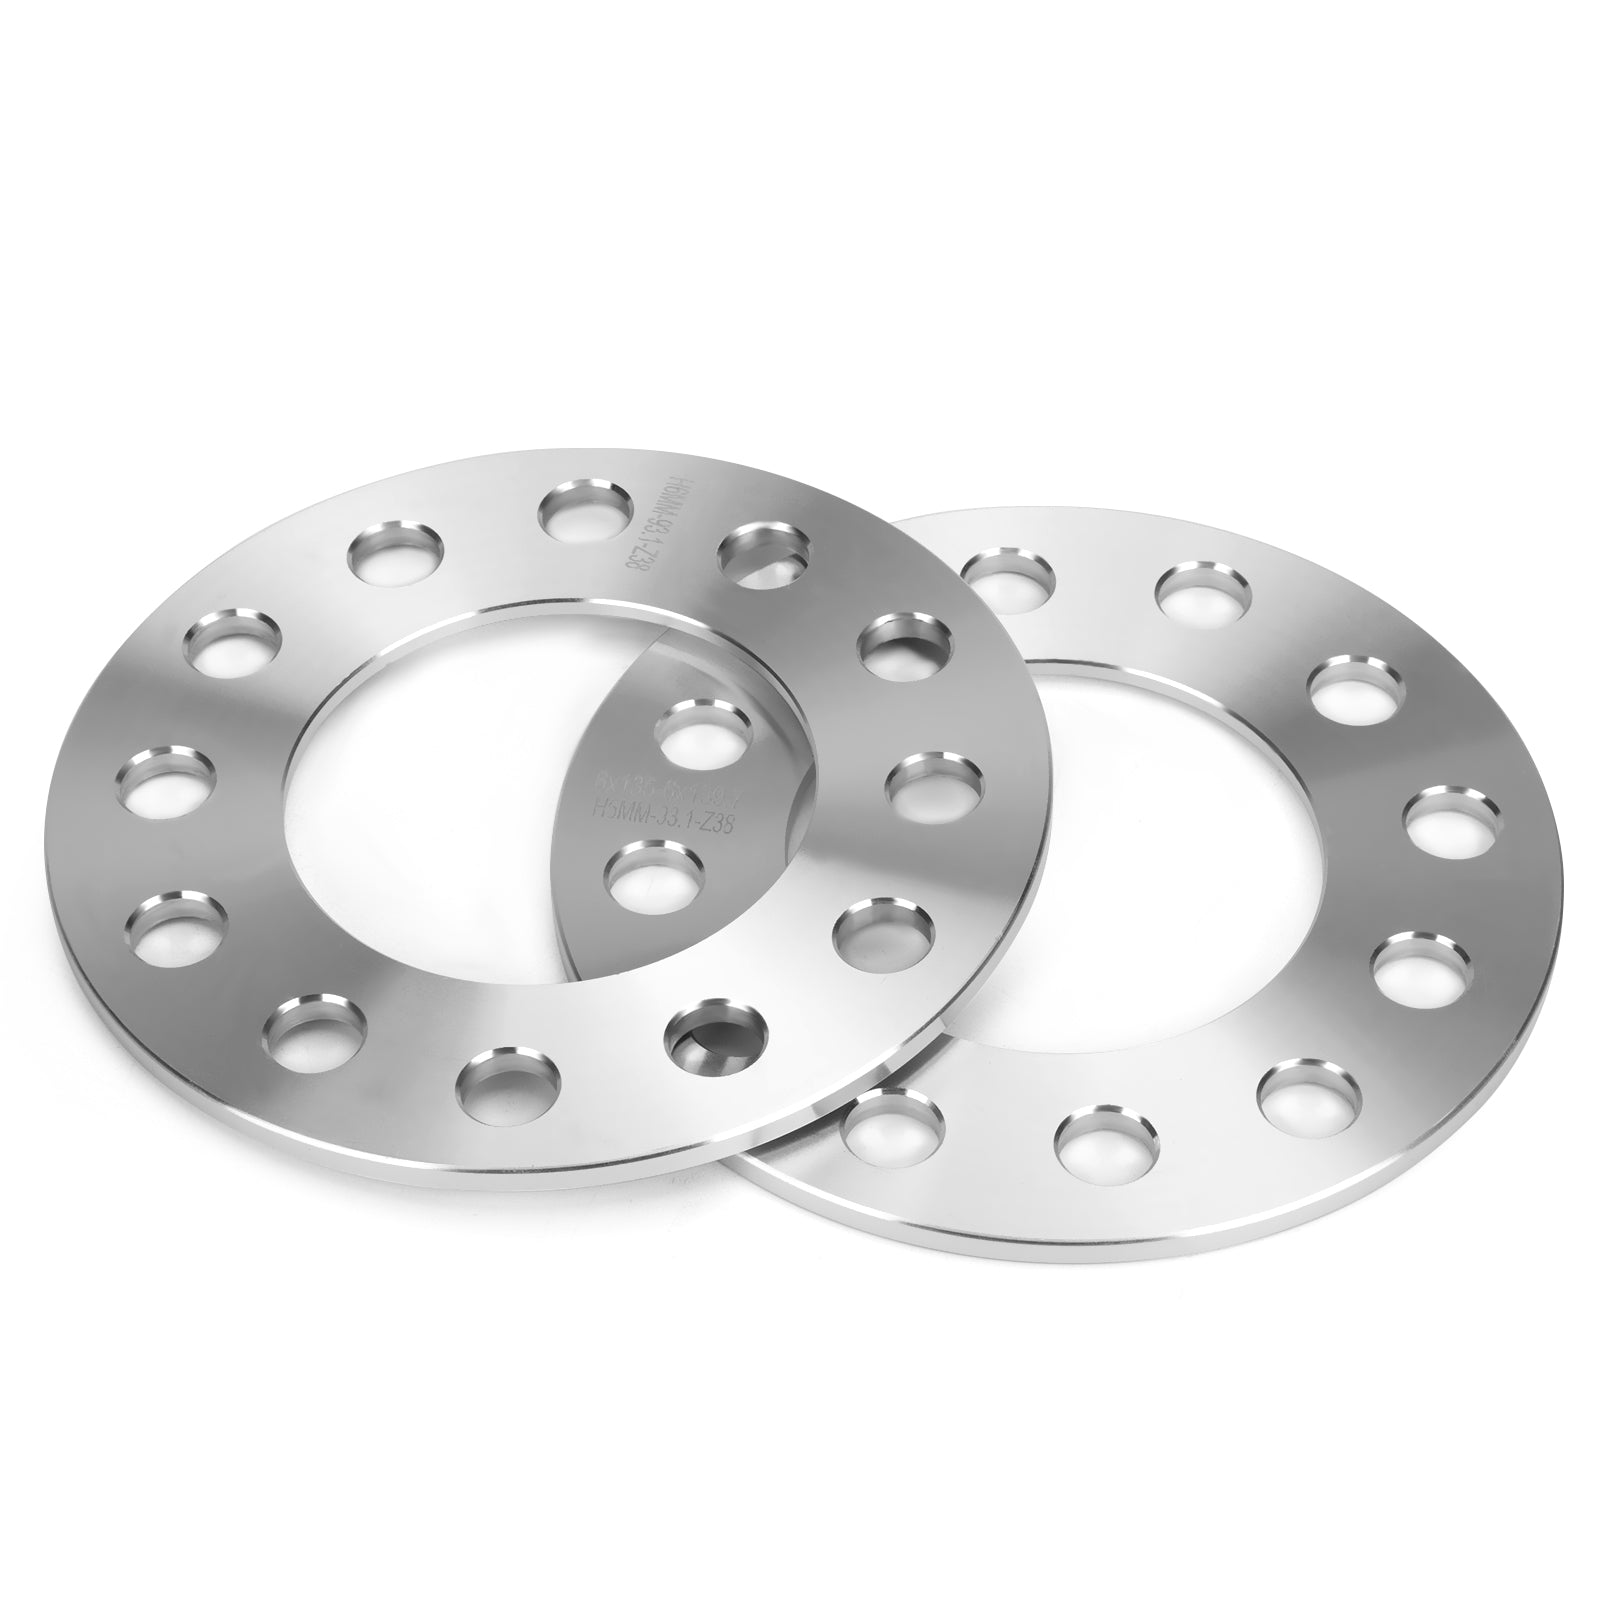 2 pcs Universal Wheel Spacers 6/12mm For 6x5.5 6x135 6x139.7 Spacer for Ranger Bronco F150 Silverado Sierra Ram 1500 Expedition-1